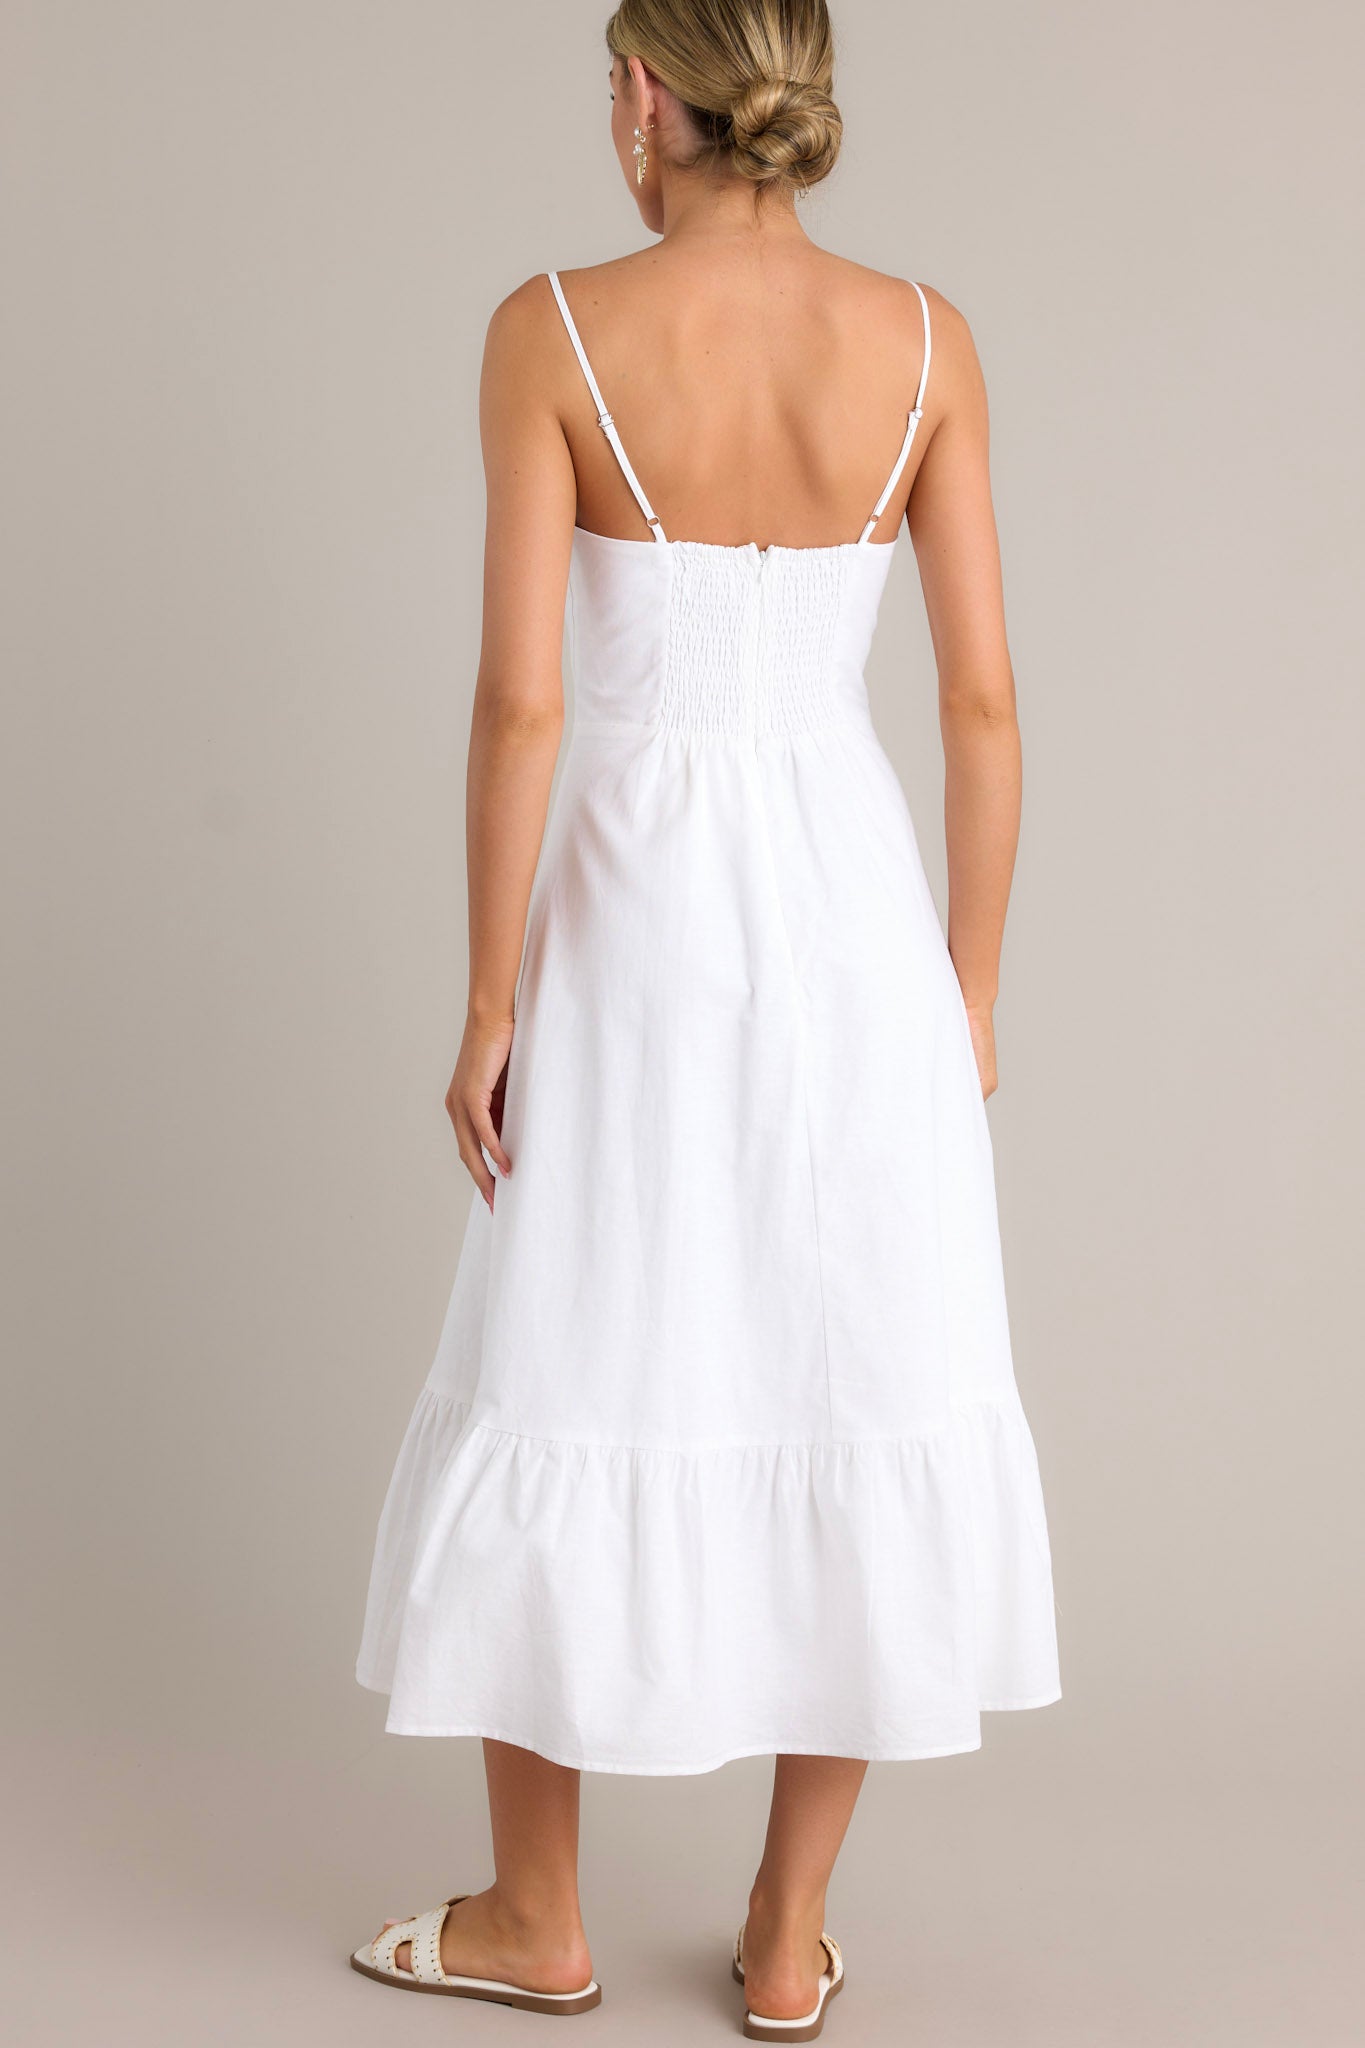 Back view of a white maxi dress highlighting the smocked back insert, thin adjustable straps, and overall fit.